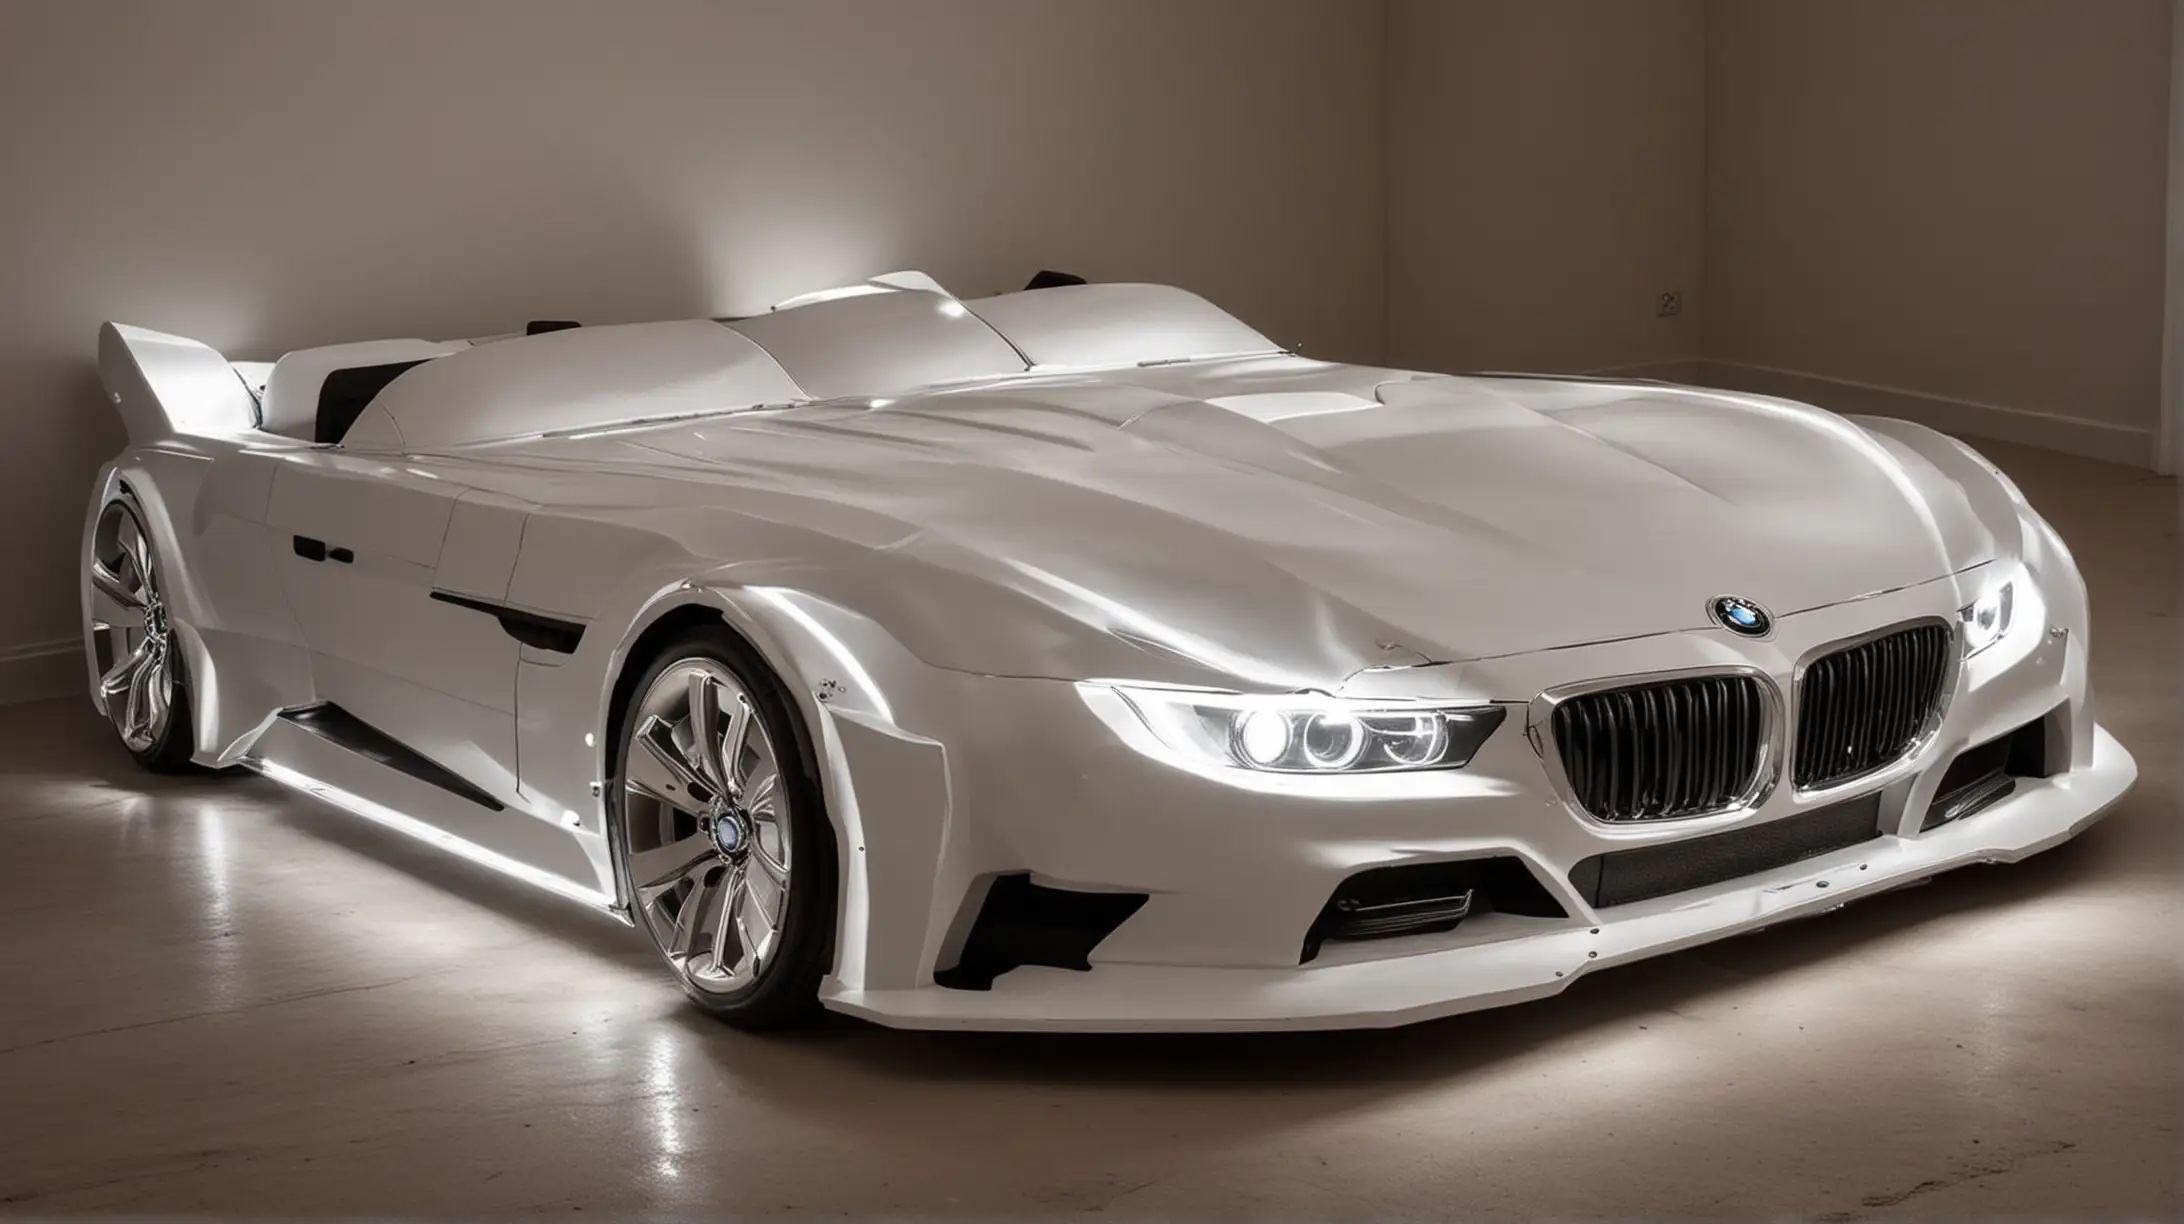 Luxurious BMW Car Double Bed with Illuminated Headlights